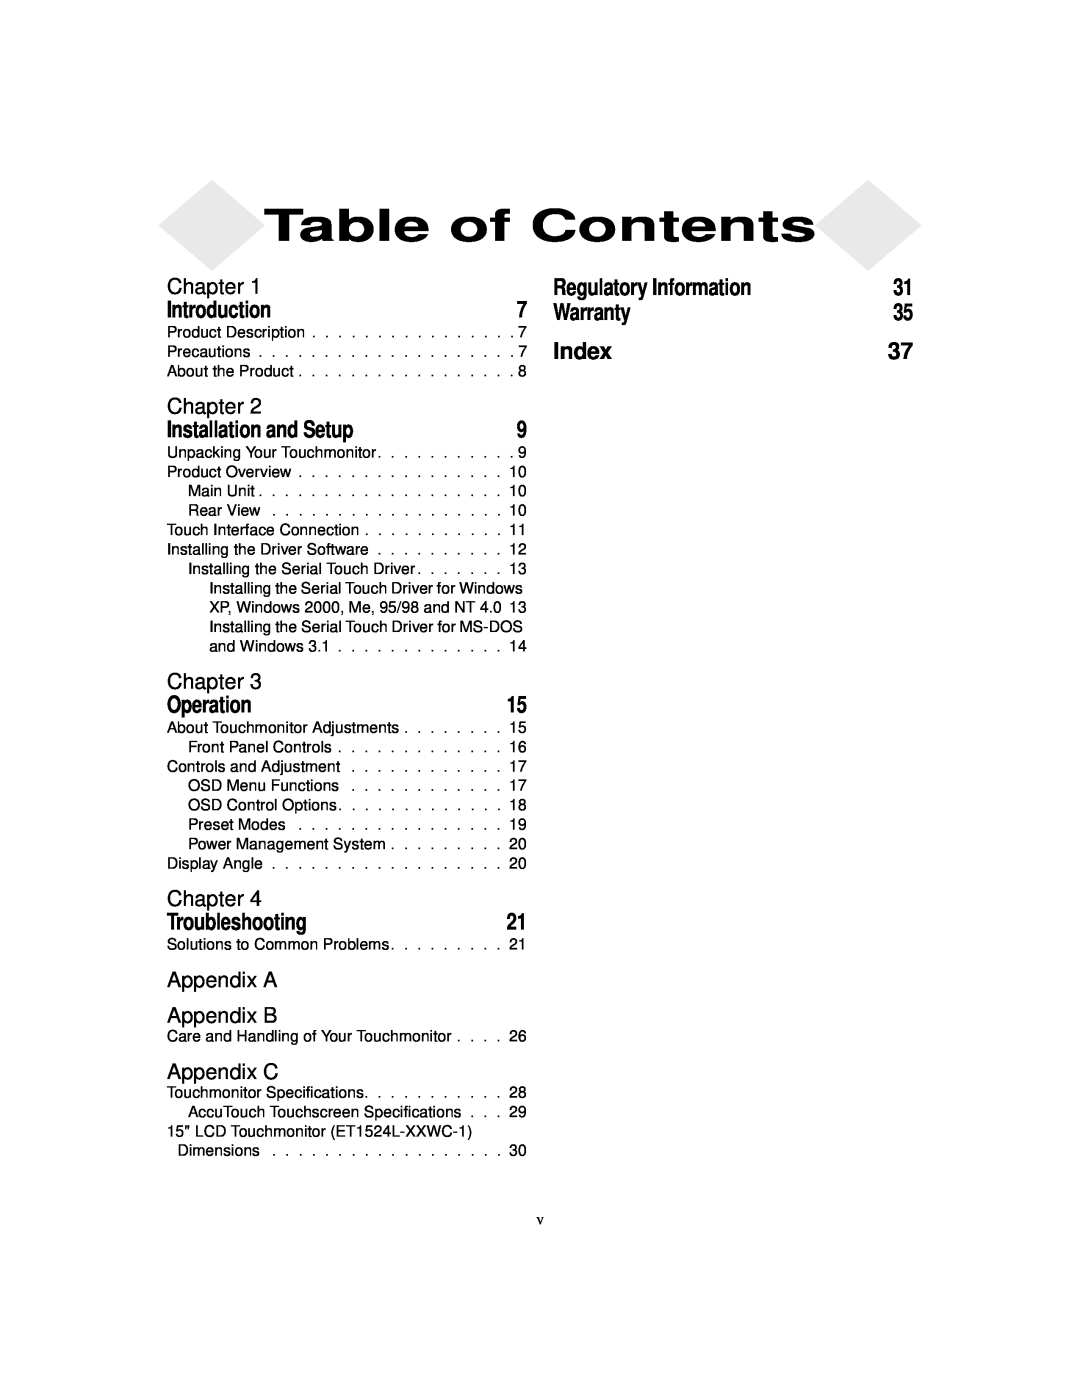 Elo TouchSystems 1524L manual Chapter, Table of Contents, Regulatory Information, Introduction, Warranty, Index, Operation 